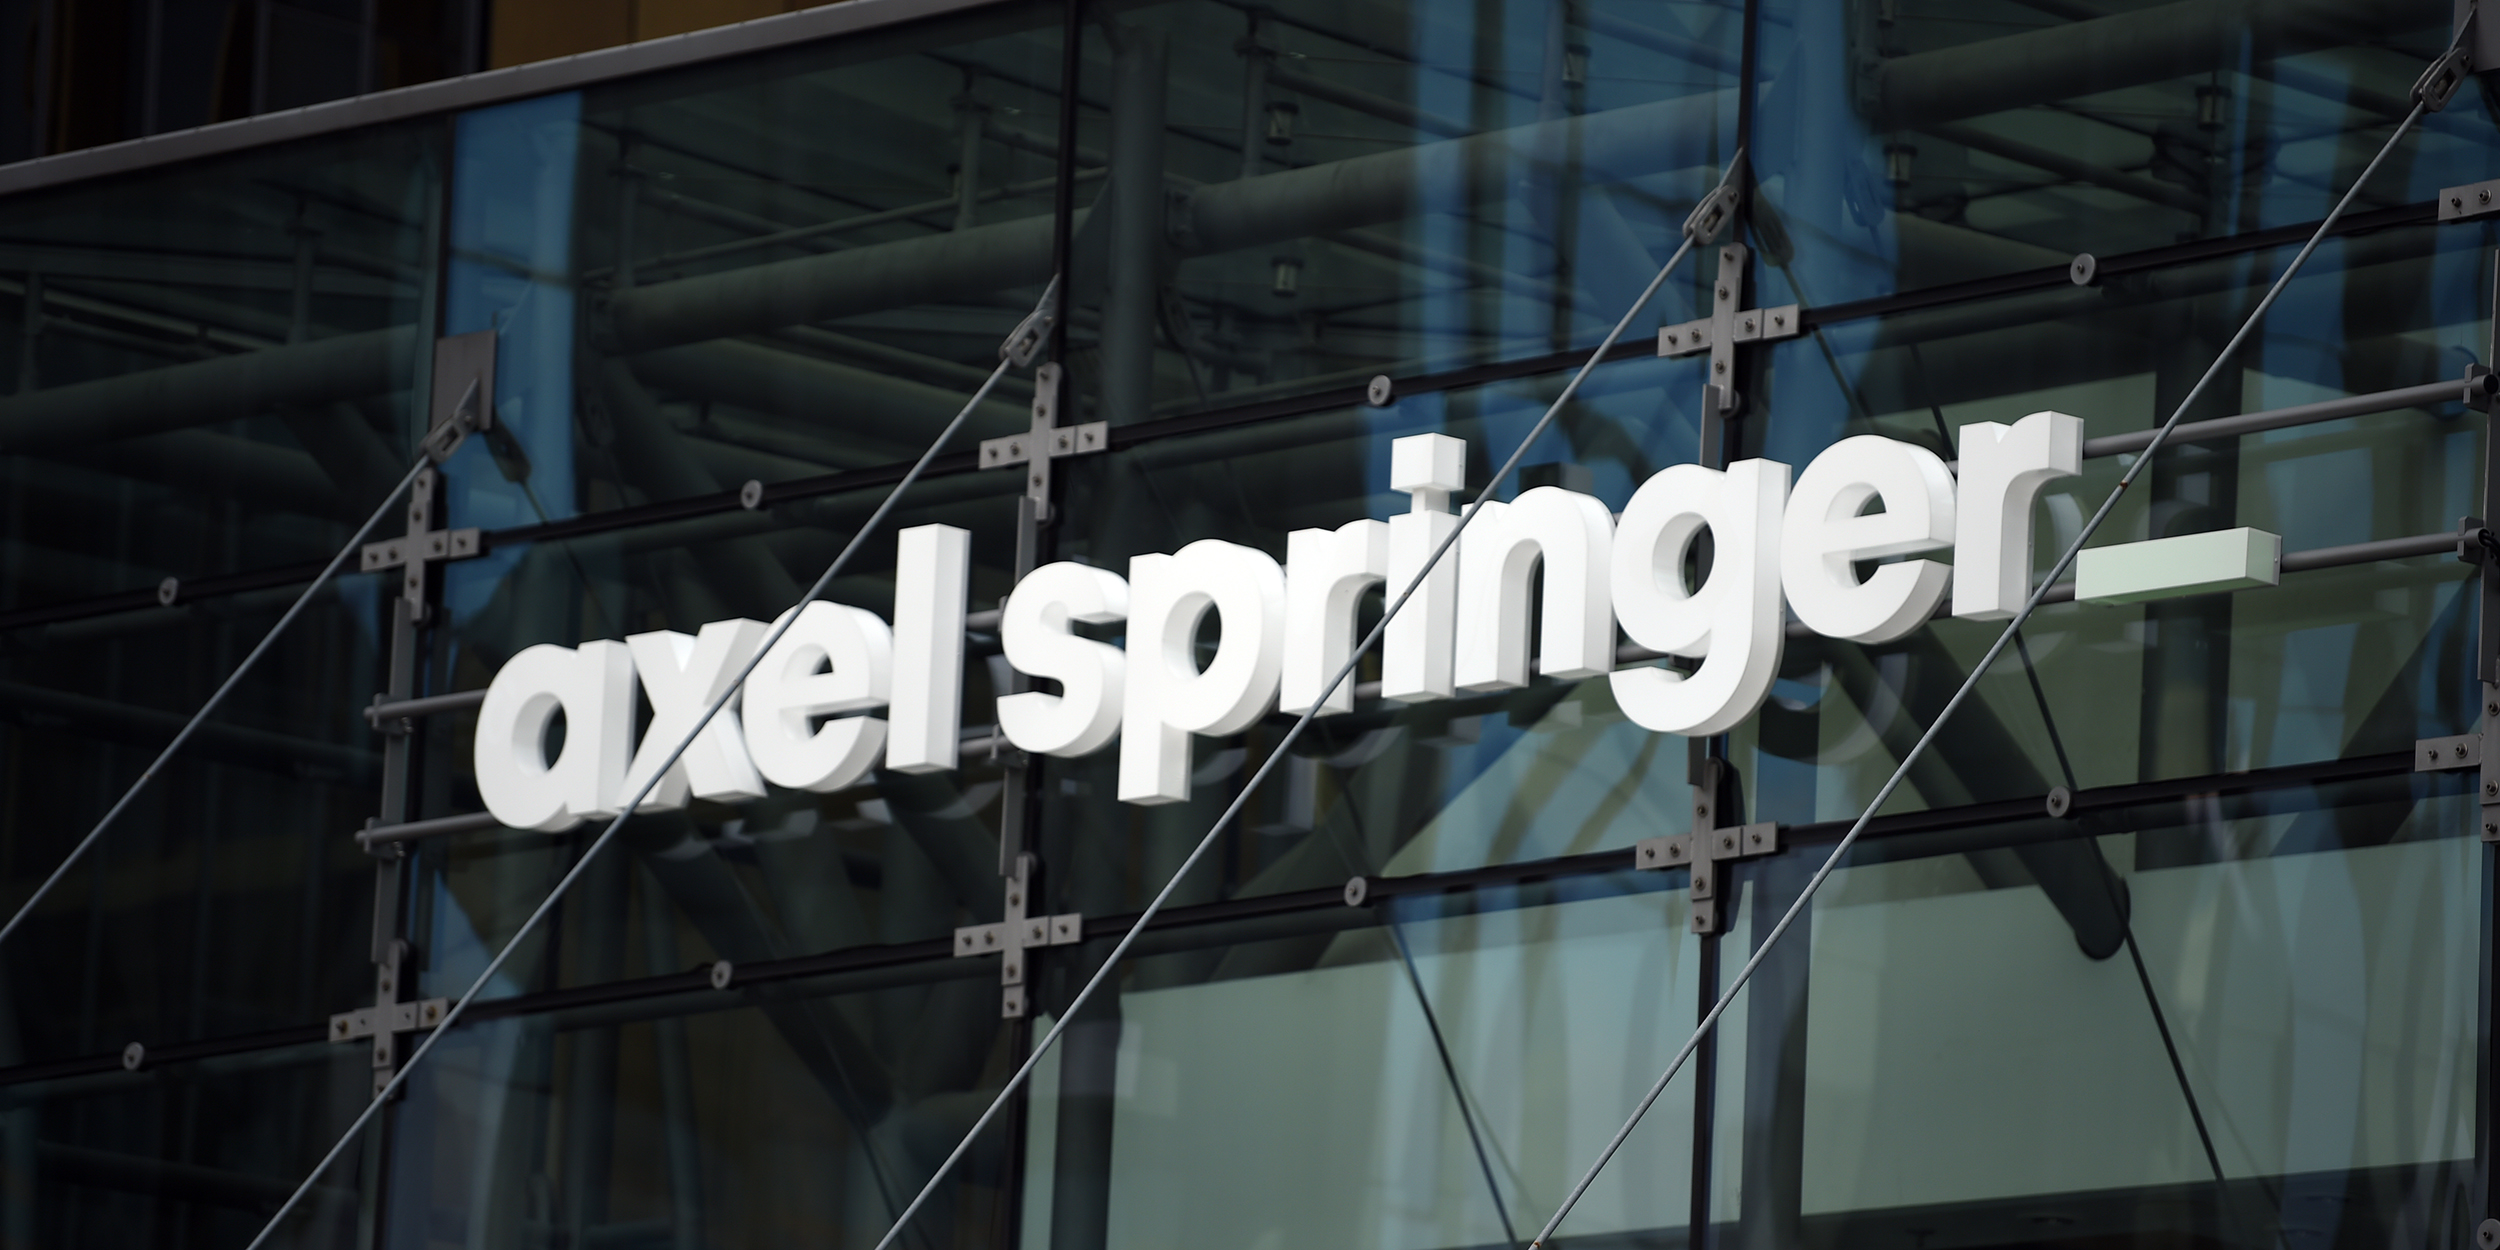 06 May 2019, Berlin: The lettering "Axel Springer" at the entrance of the Axel Springer skyscraper. (to "Axel Springer - 1st Quarter") Photo: Sven Braun/dpa (Photo by Sven Braun/picture alliance via Getty Images)